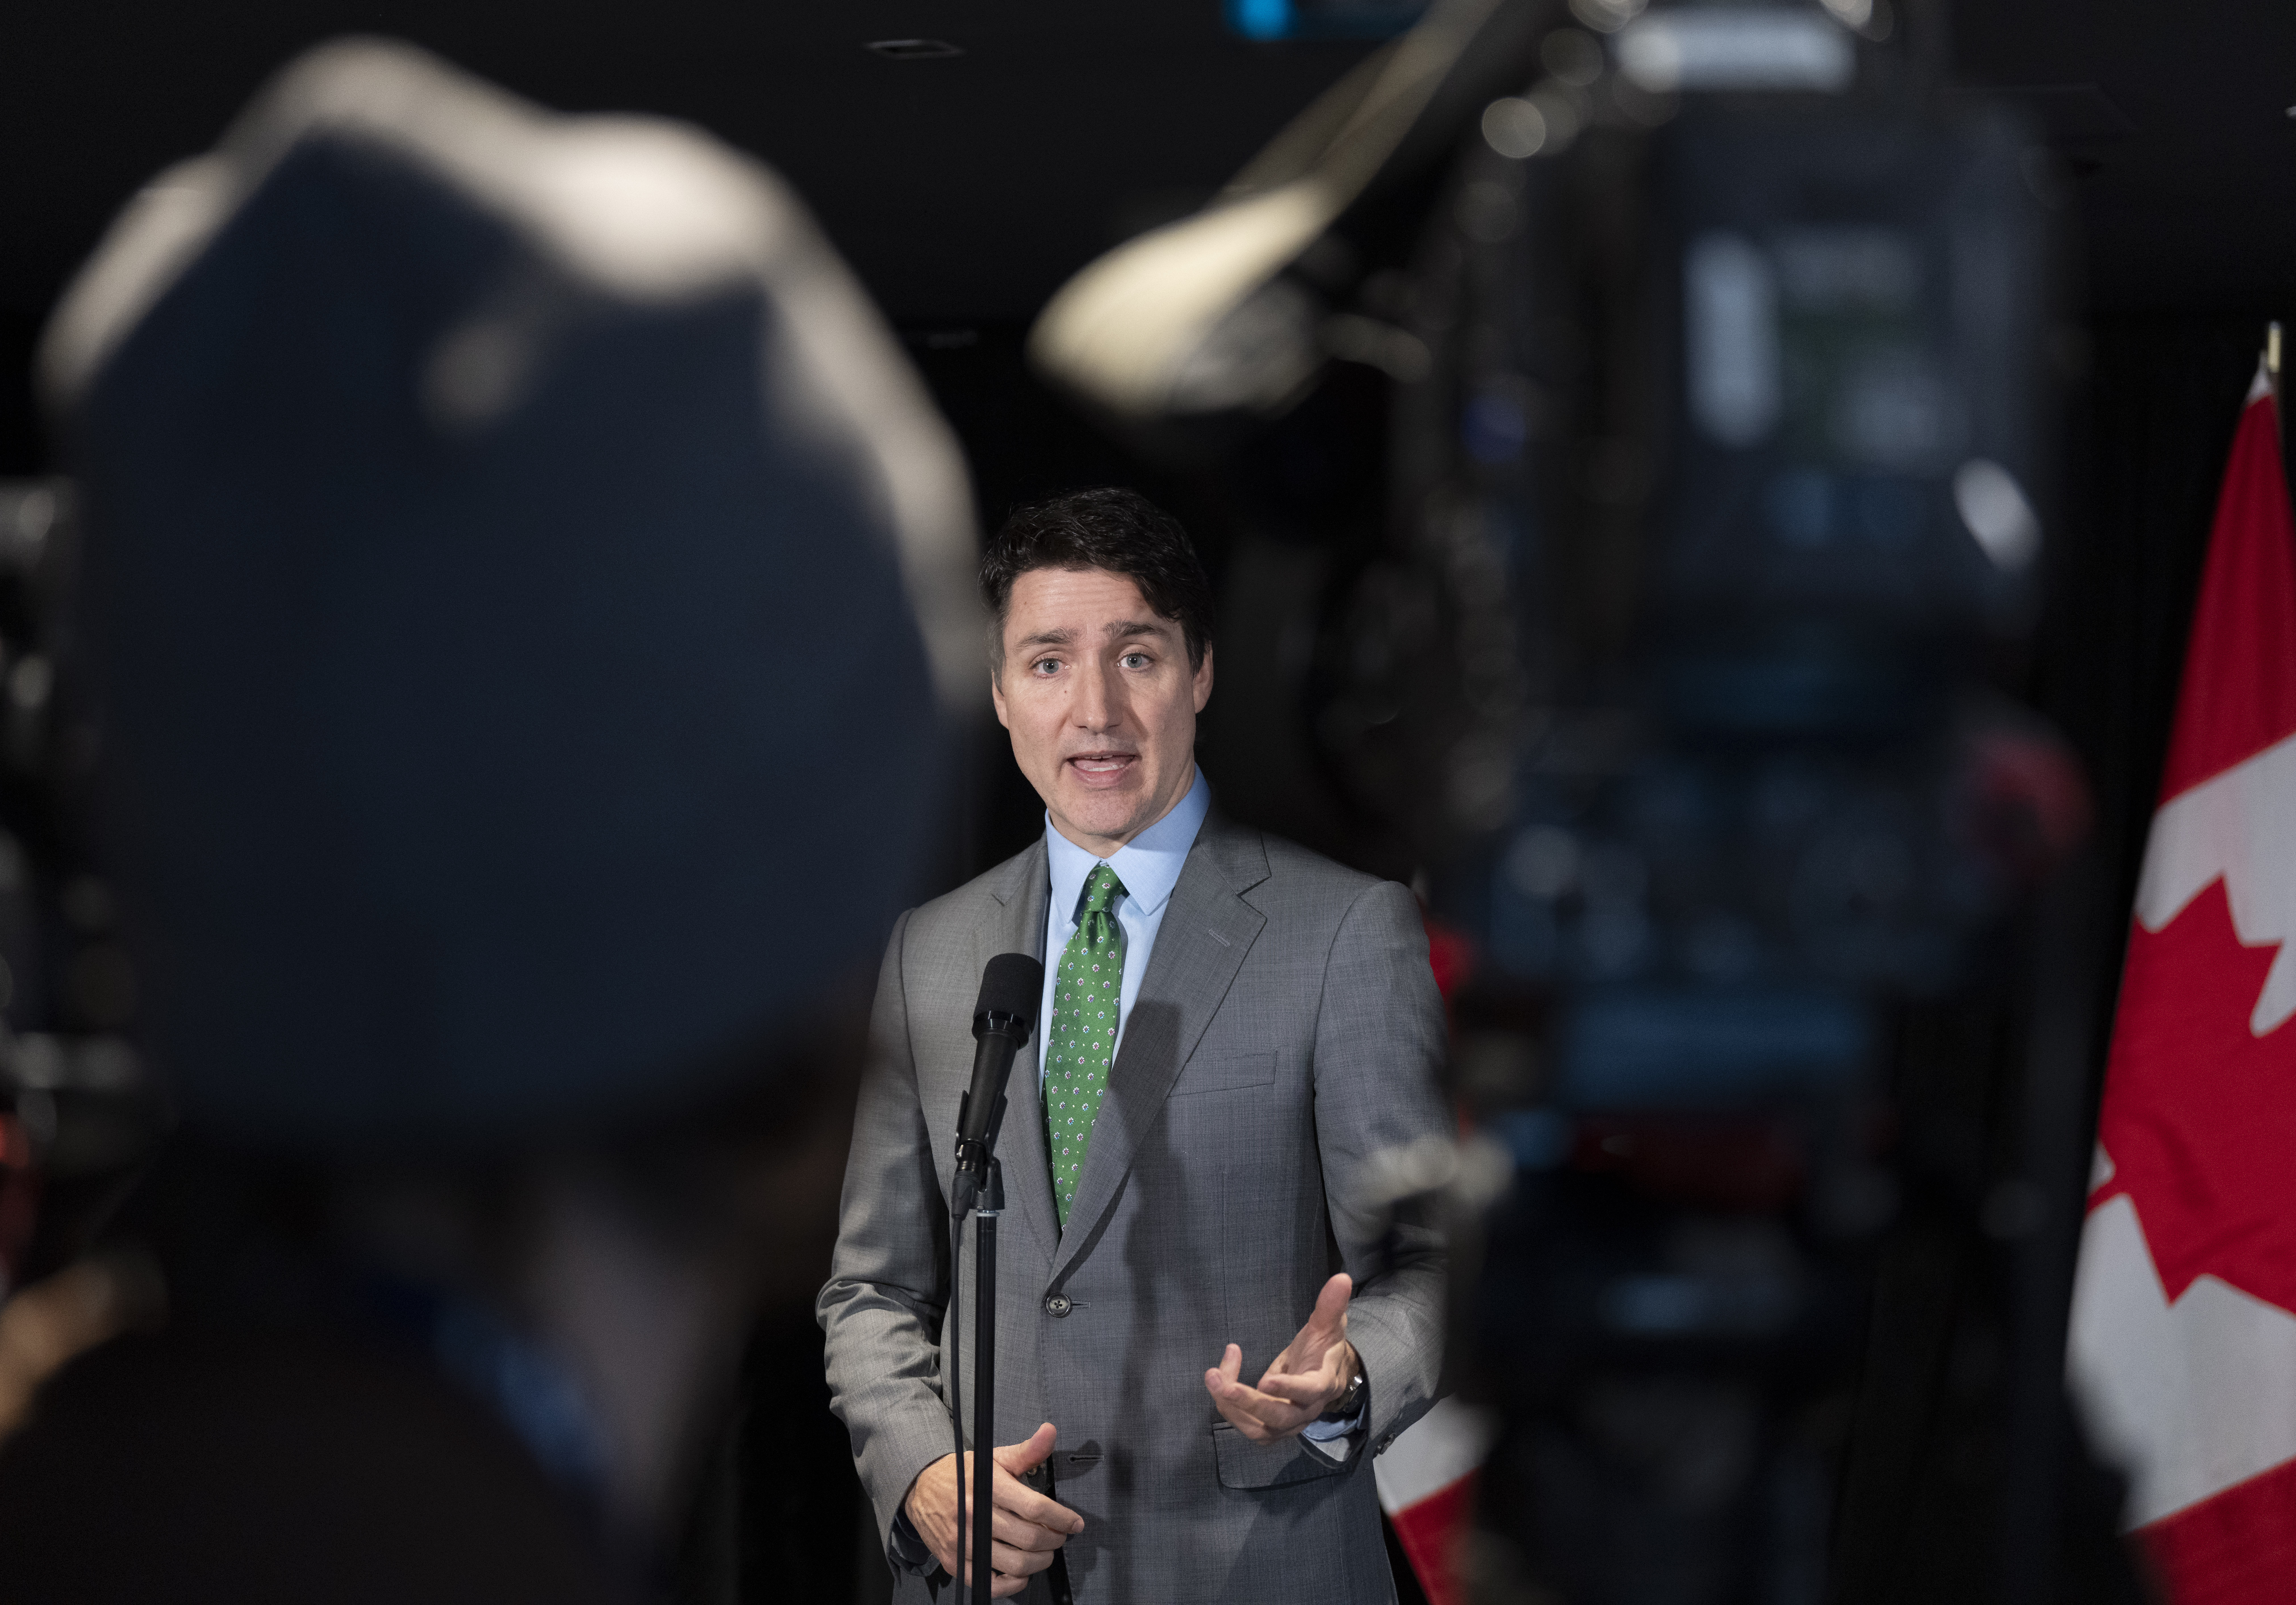 Carbon price pause call from Nfld. premier about  ‘political pressure’: Trudeau